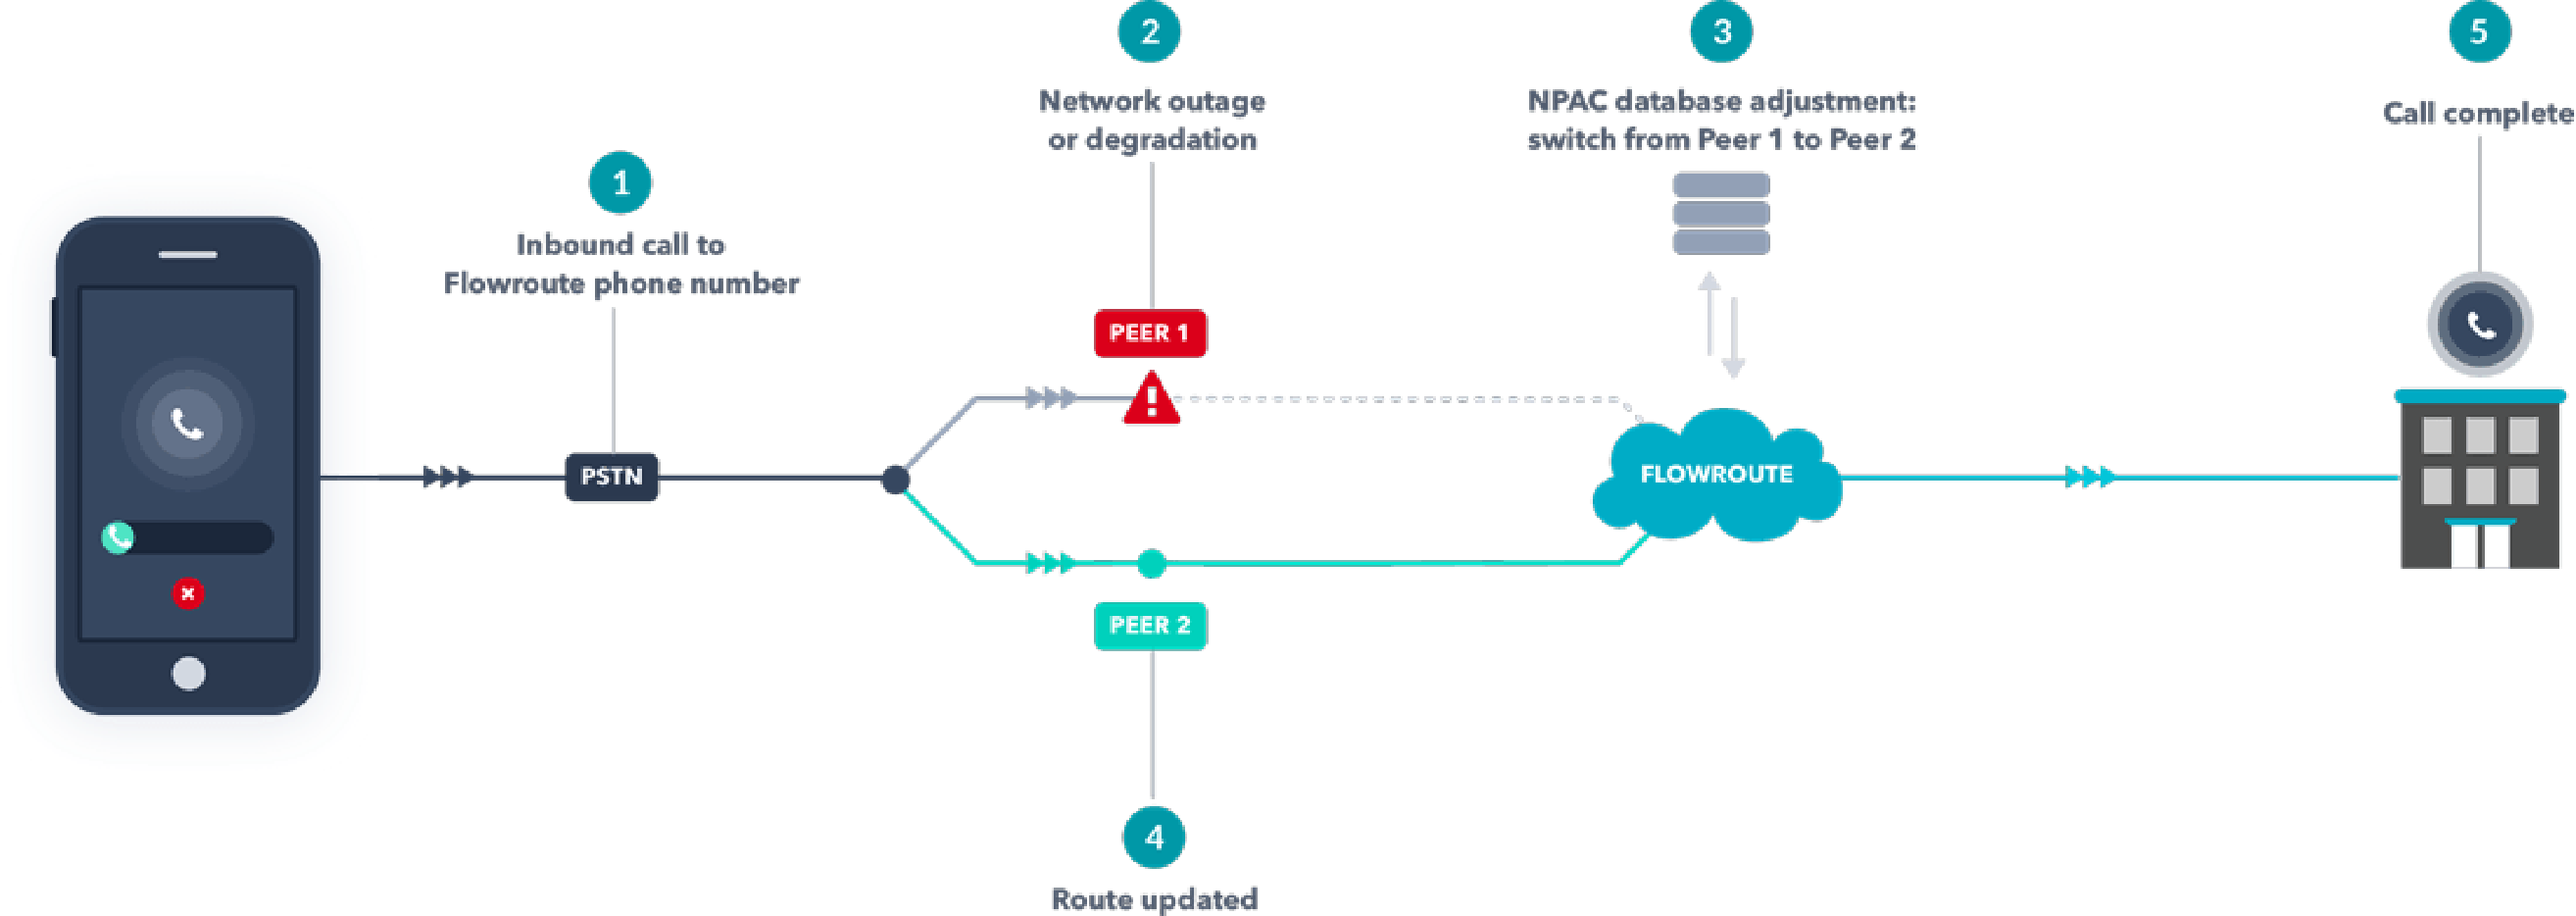 Take Back Control with Flowroute's HyperNetwork